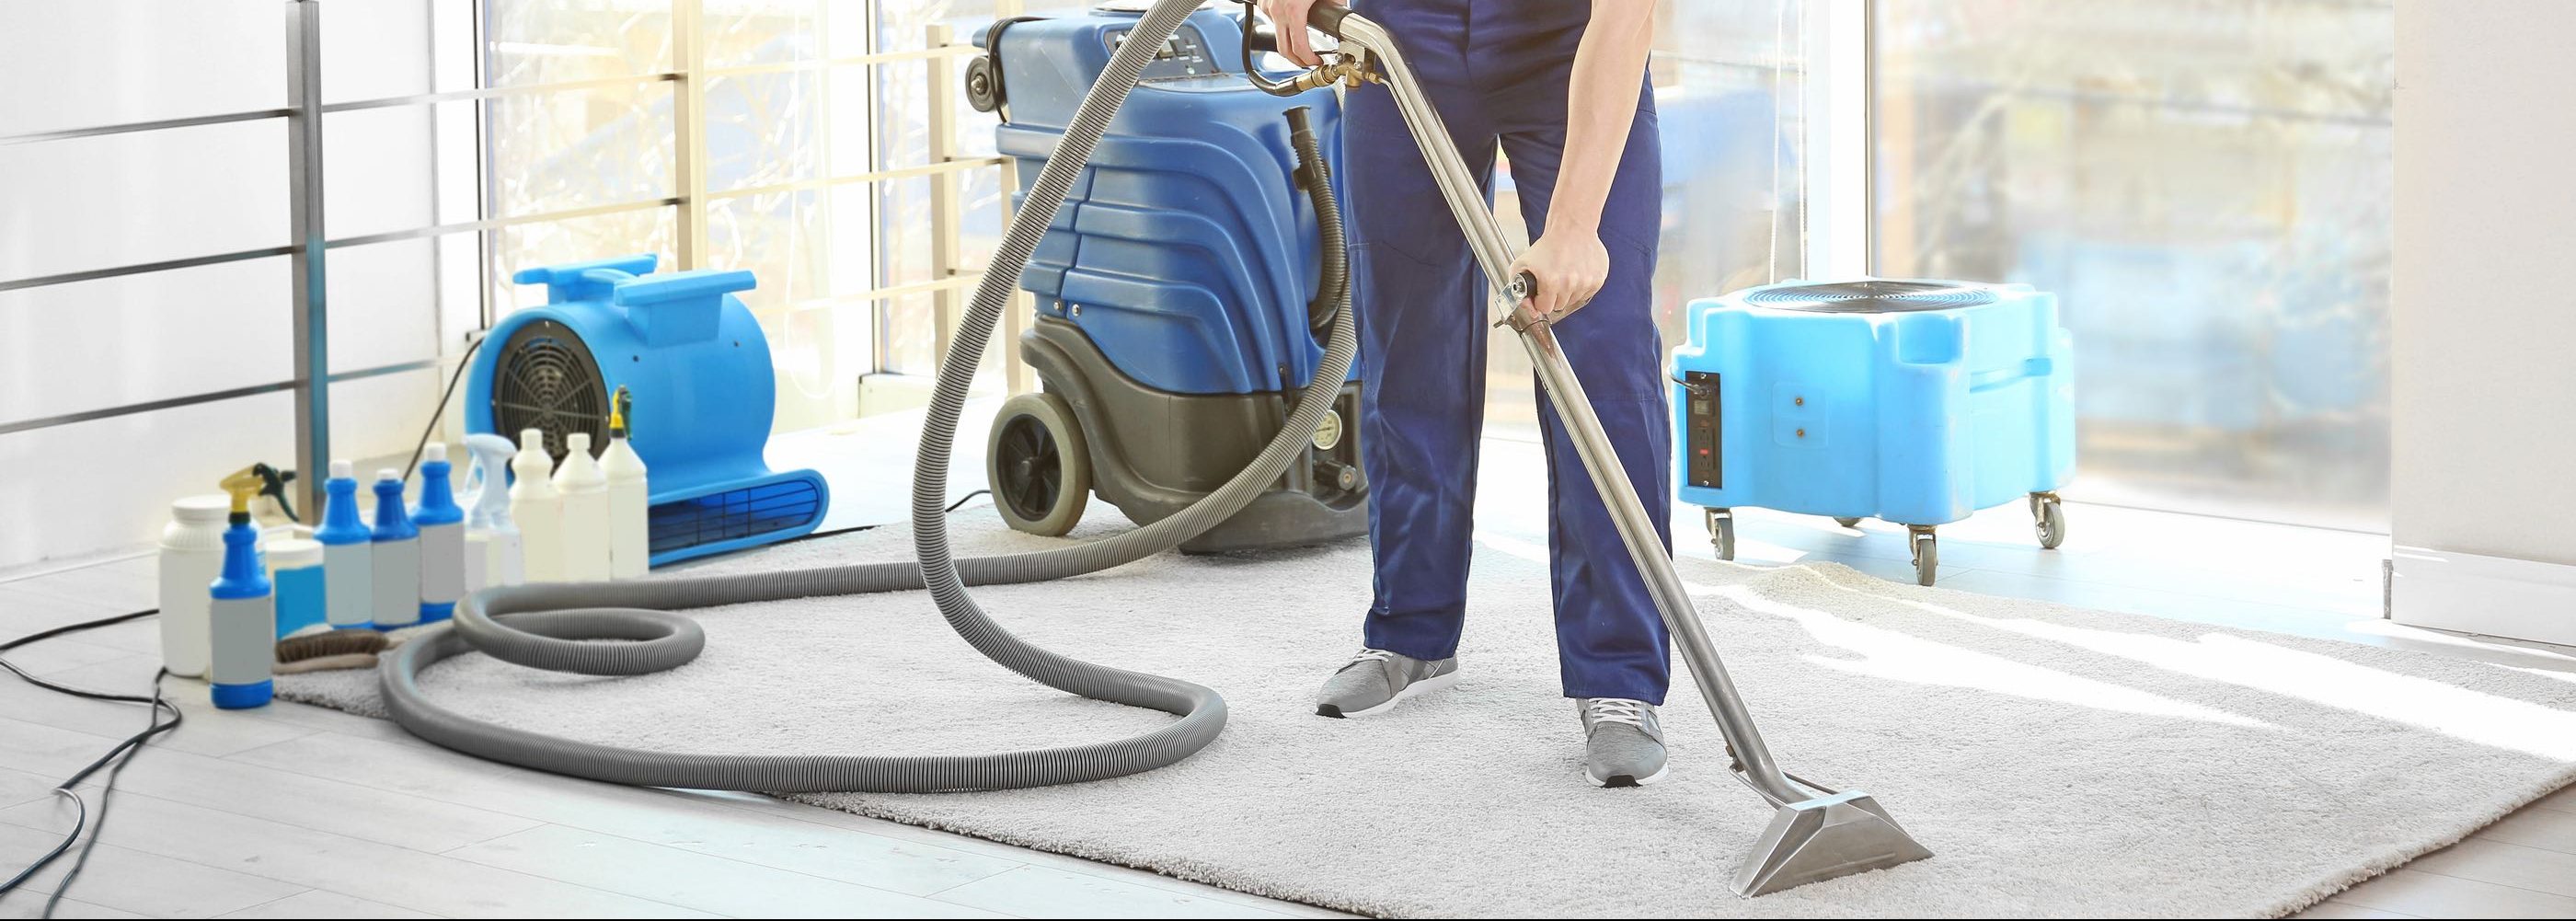 JK Carpet Cleaning in Coventry